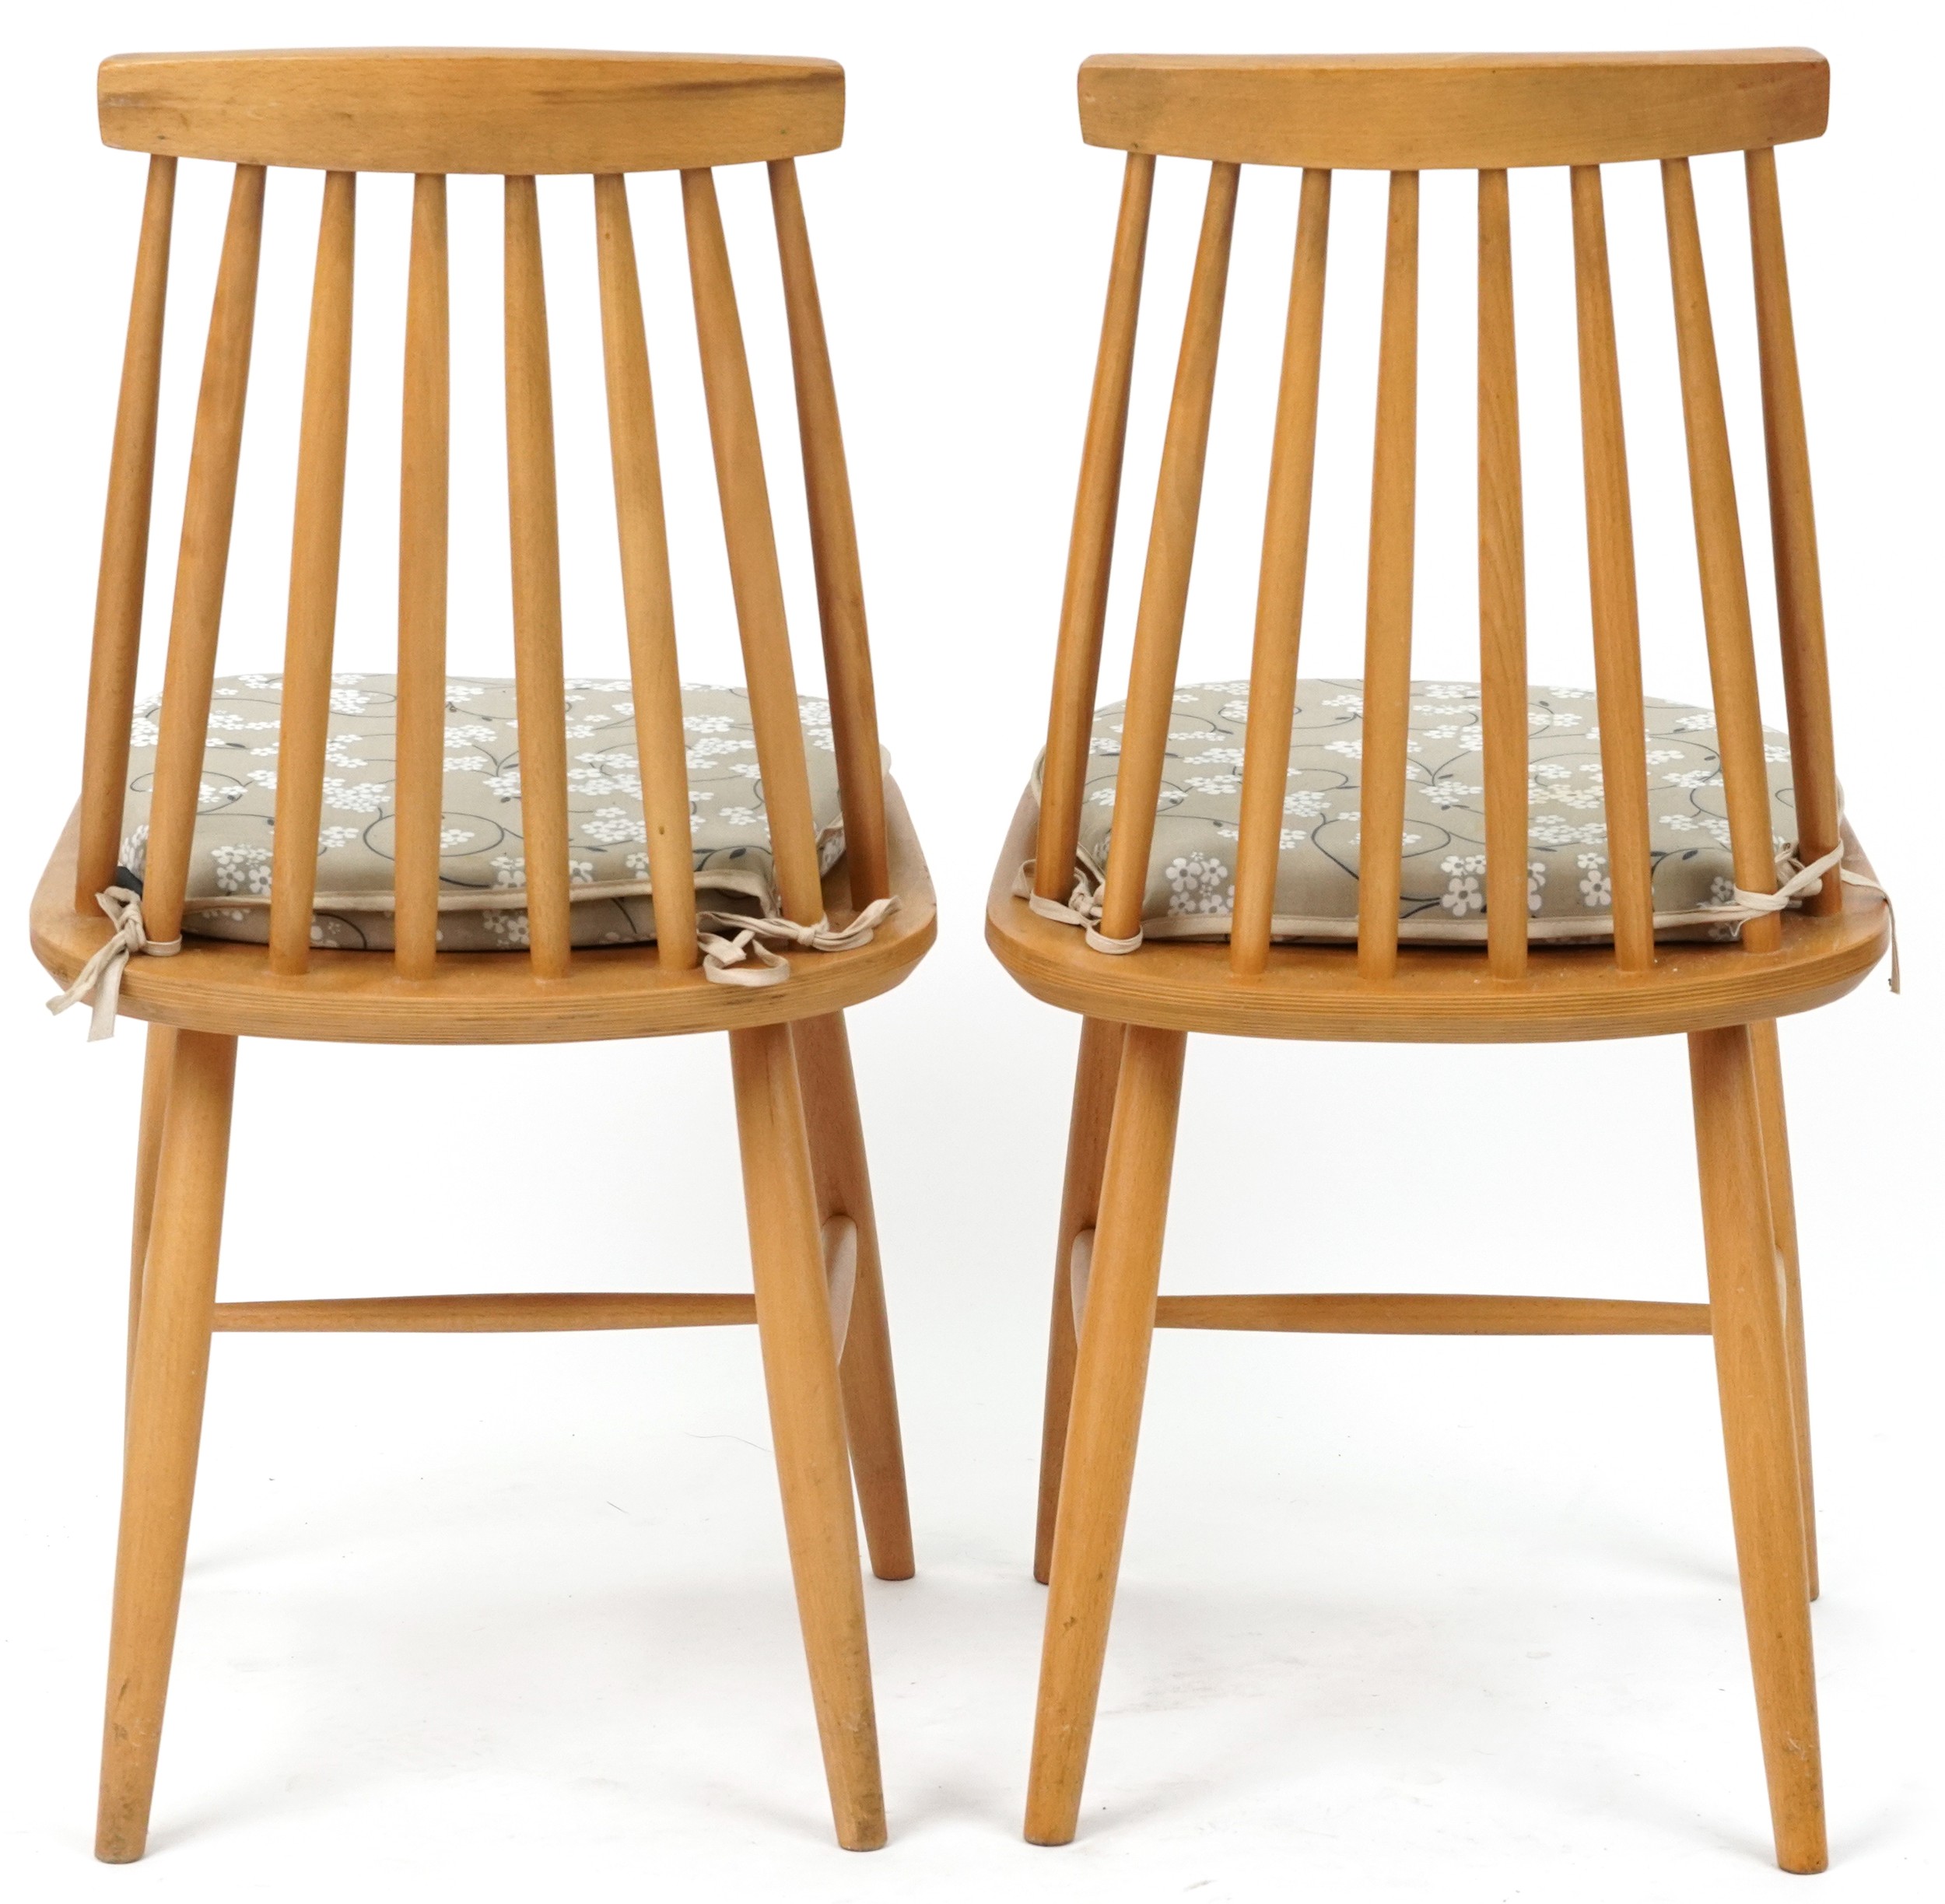 Ercol style lightwood drop end dining table with two stick back chairs, the table 74cm H x 55cm W - Image 9 of 9